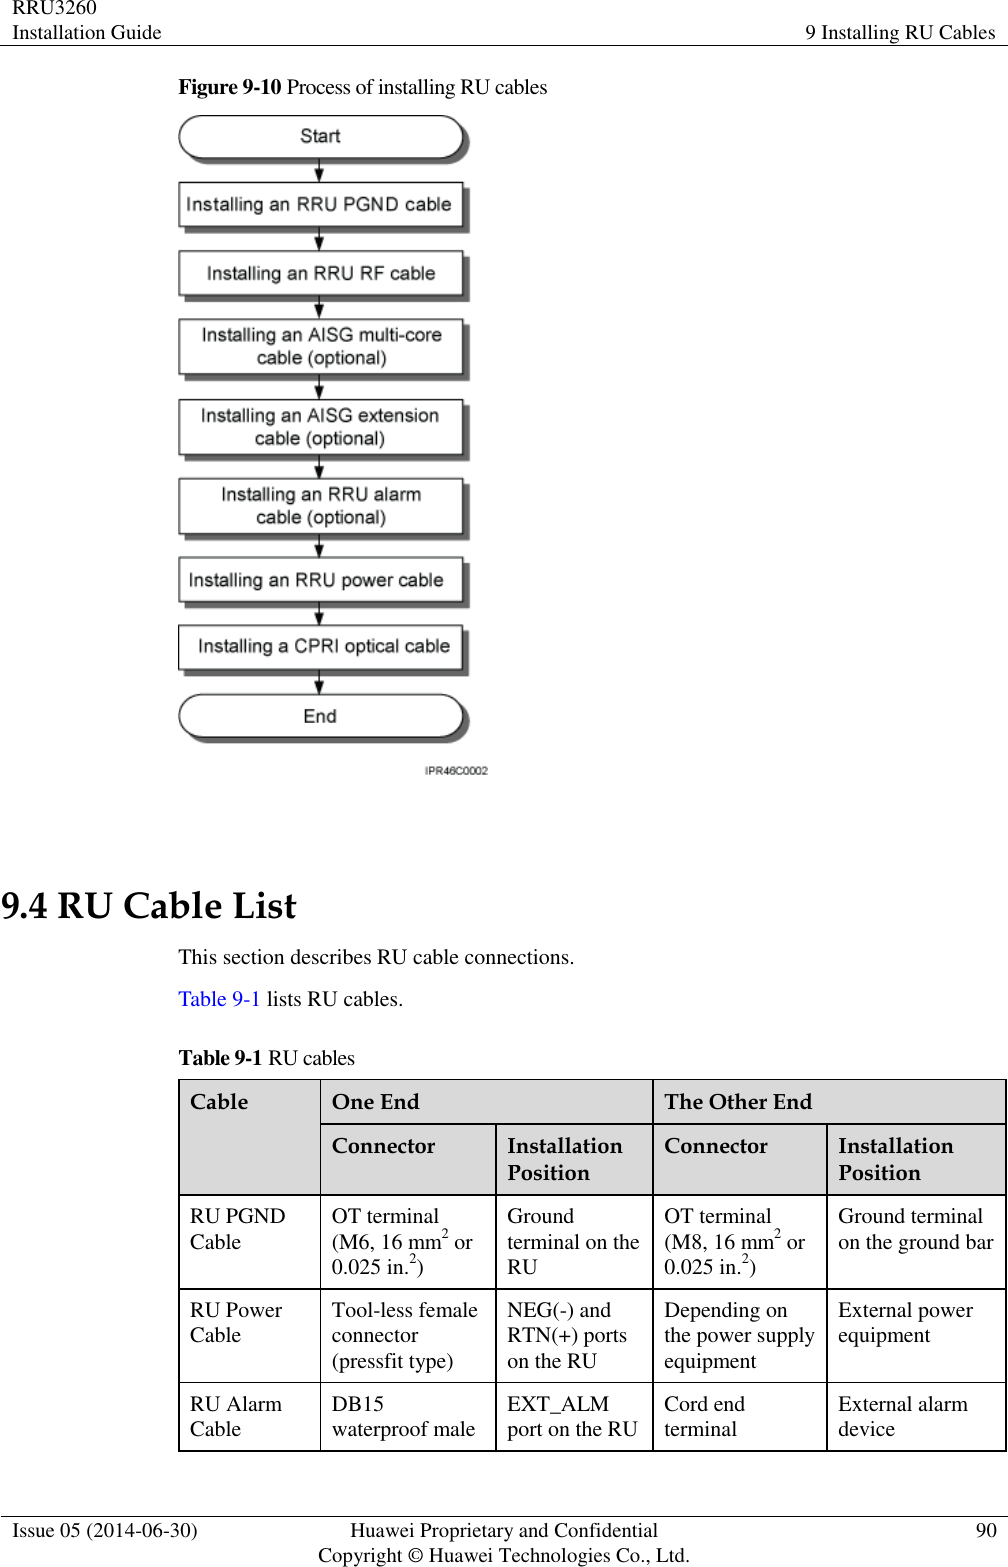 RRU3260 Installation Guide 9 Installing RU Cables  Issue 05 (2014-06-30) Huawei Proprietary and Confidential                                     Copyright © Huawei Technologies Co., Ltd. 90  Figure 9-10 Process of installing RU cables   9.4 RU Cable List This section describes RU cable connections. Table 9-1 lists RU cables. Table 9-1 RU cables Cable One End The Other End Connector Installation Position Connector Installation Position RU PGND Cable OT terminal (M6, 16 mm2 or 0.025 in.2) Ground terminal on the RU OT terminal (M8, 16 mm2 or 0.025 in.2) Ground terminal on the ground bar RU Power Cable Tool-less female connector (pressfit type) NEG(-) and RTN(+) ports on the RU Depending on the power supply equipment External power equipment RU Alarm Cable DB15 waterproof male EXT_ALM port on the RU Cord end terminal External alarm device 